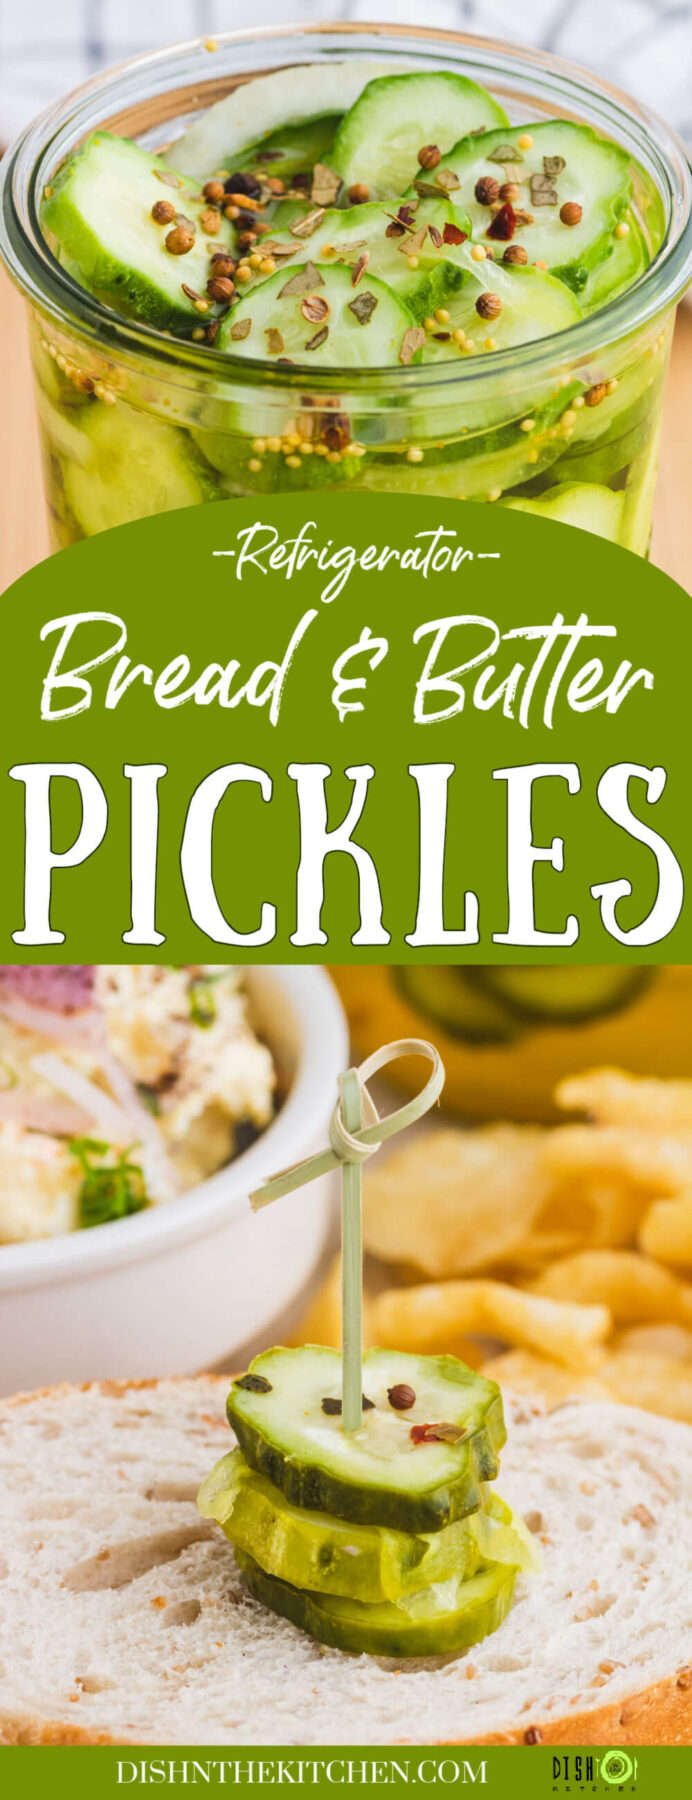 Pinterest image of a jar of sliced cucumbers and onions topped with pickling spice and brine and a sandwich garnished with Refrigerator Bread and Butter Pickles.